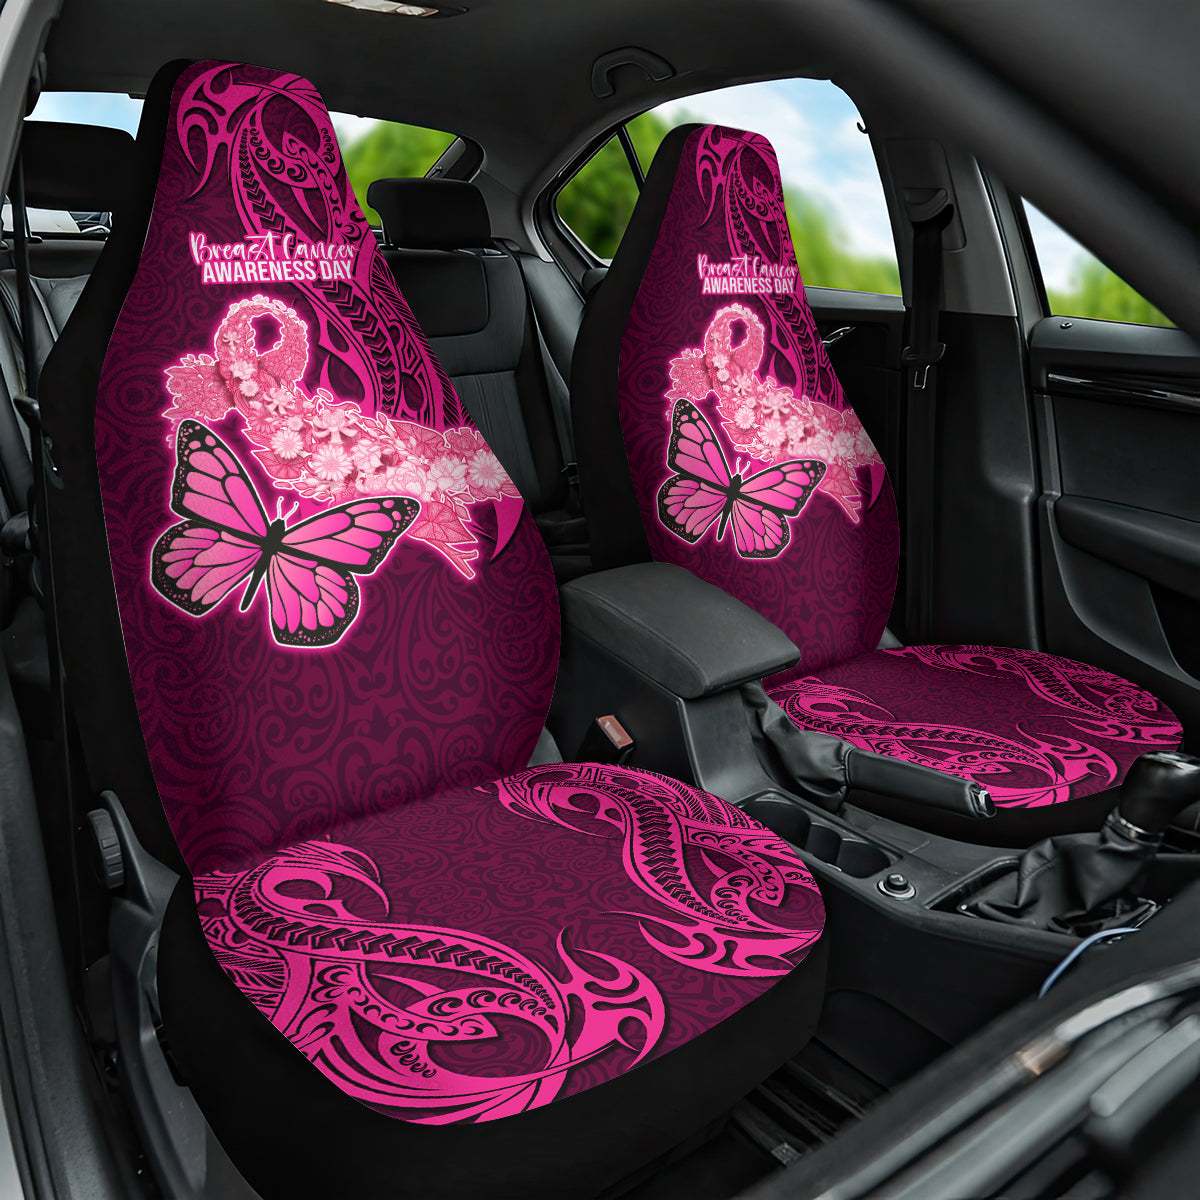 Polynesia Breast Cancer Car Seat Cover Butterfly and Flowers Ribbon Maori Tattoo Ethnic Pink Style LT03 One Size Pink - Polynesian Pride